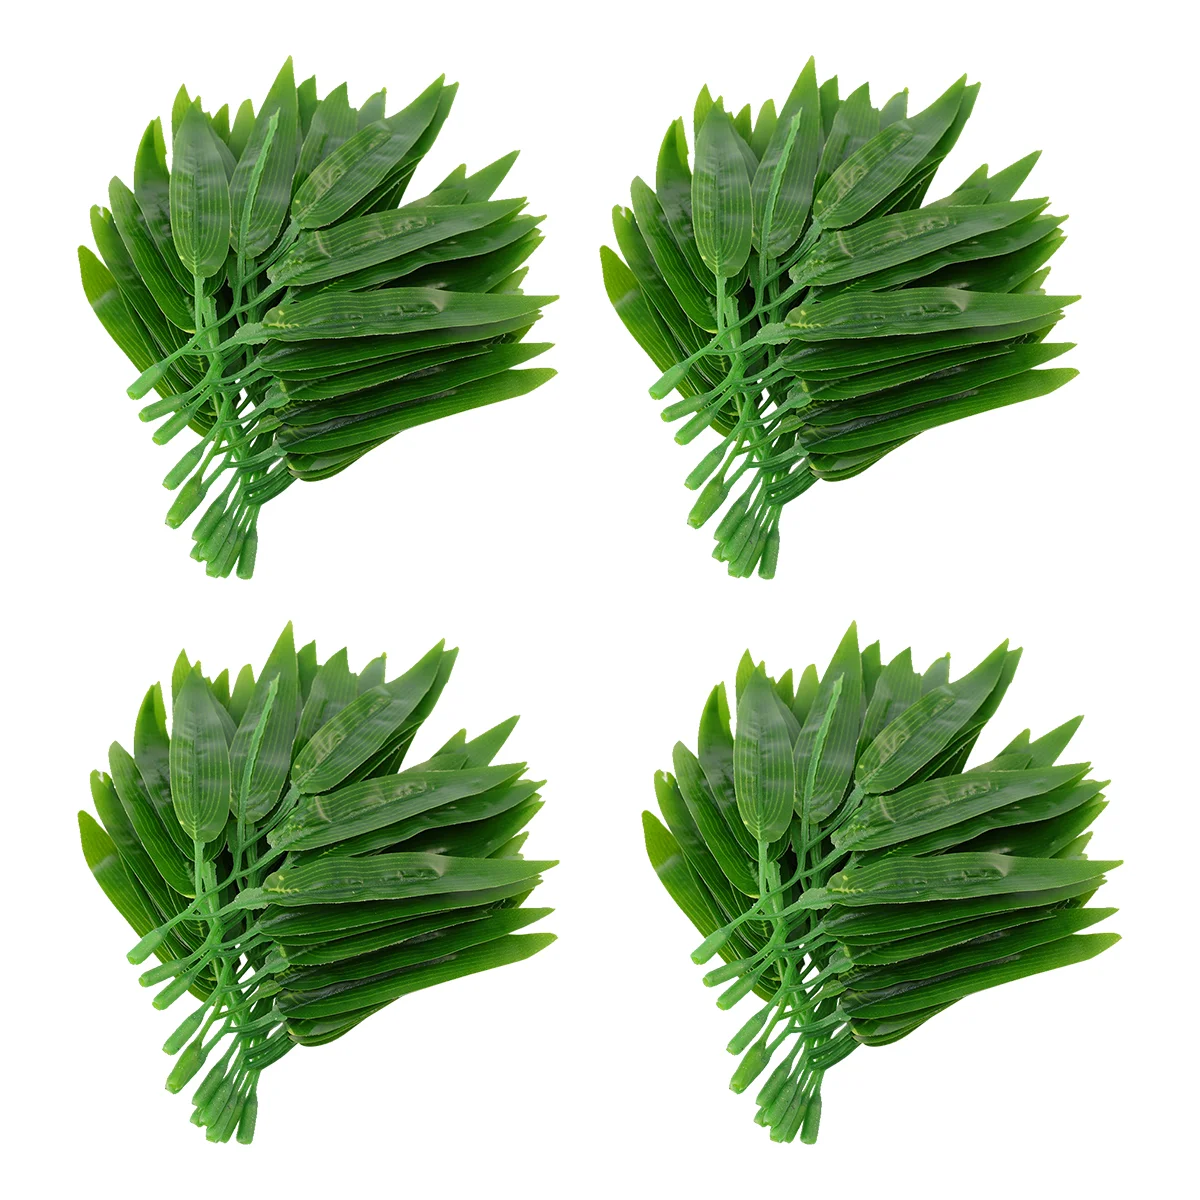 

50pcs artificial Leaves Artificial Leaves Stems Simulation Leaves Artificial Greenery Leavesfor Home Wedding Restaurant leaves